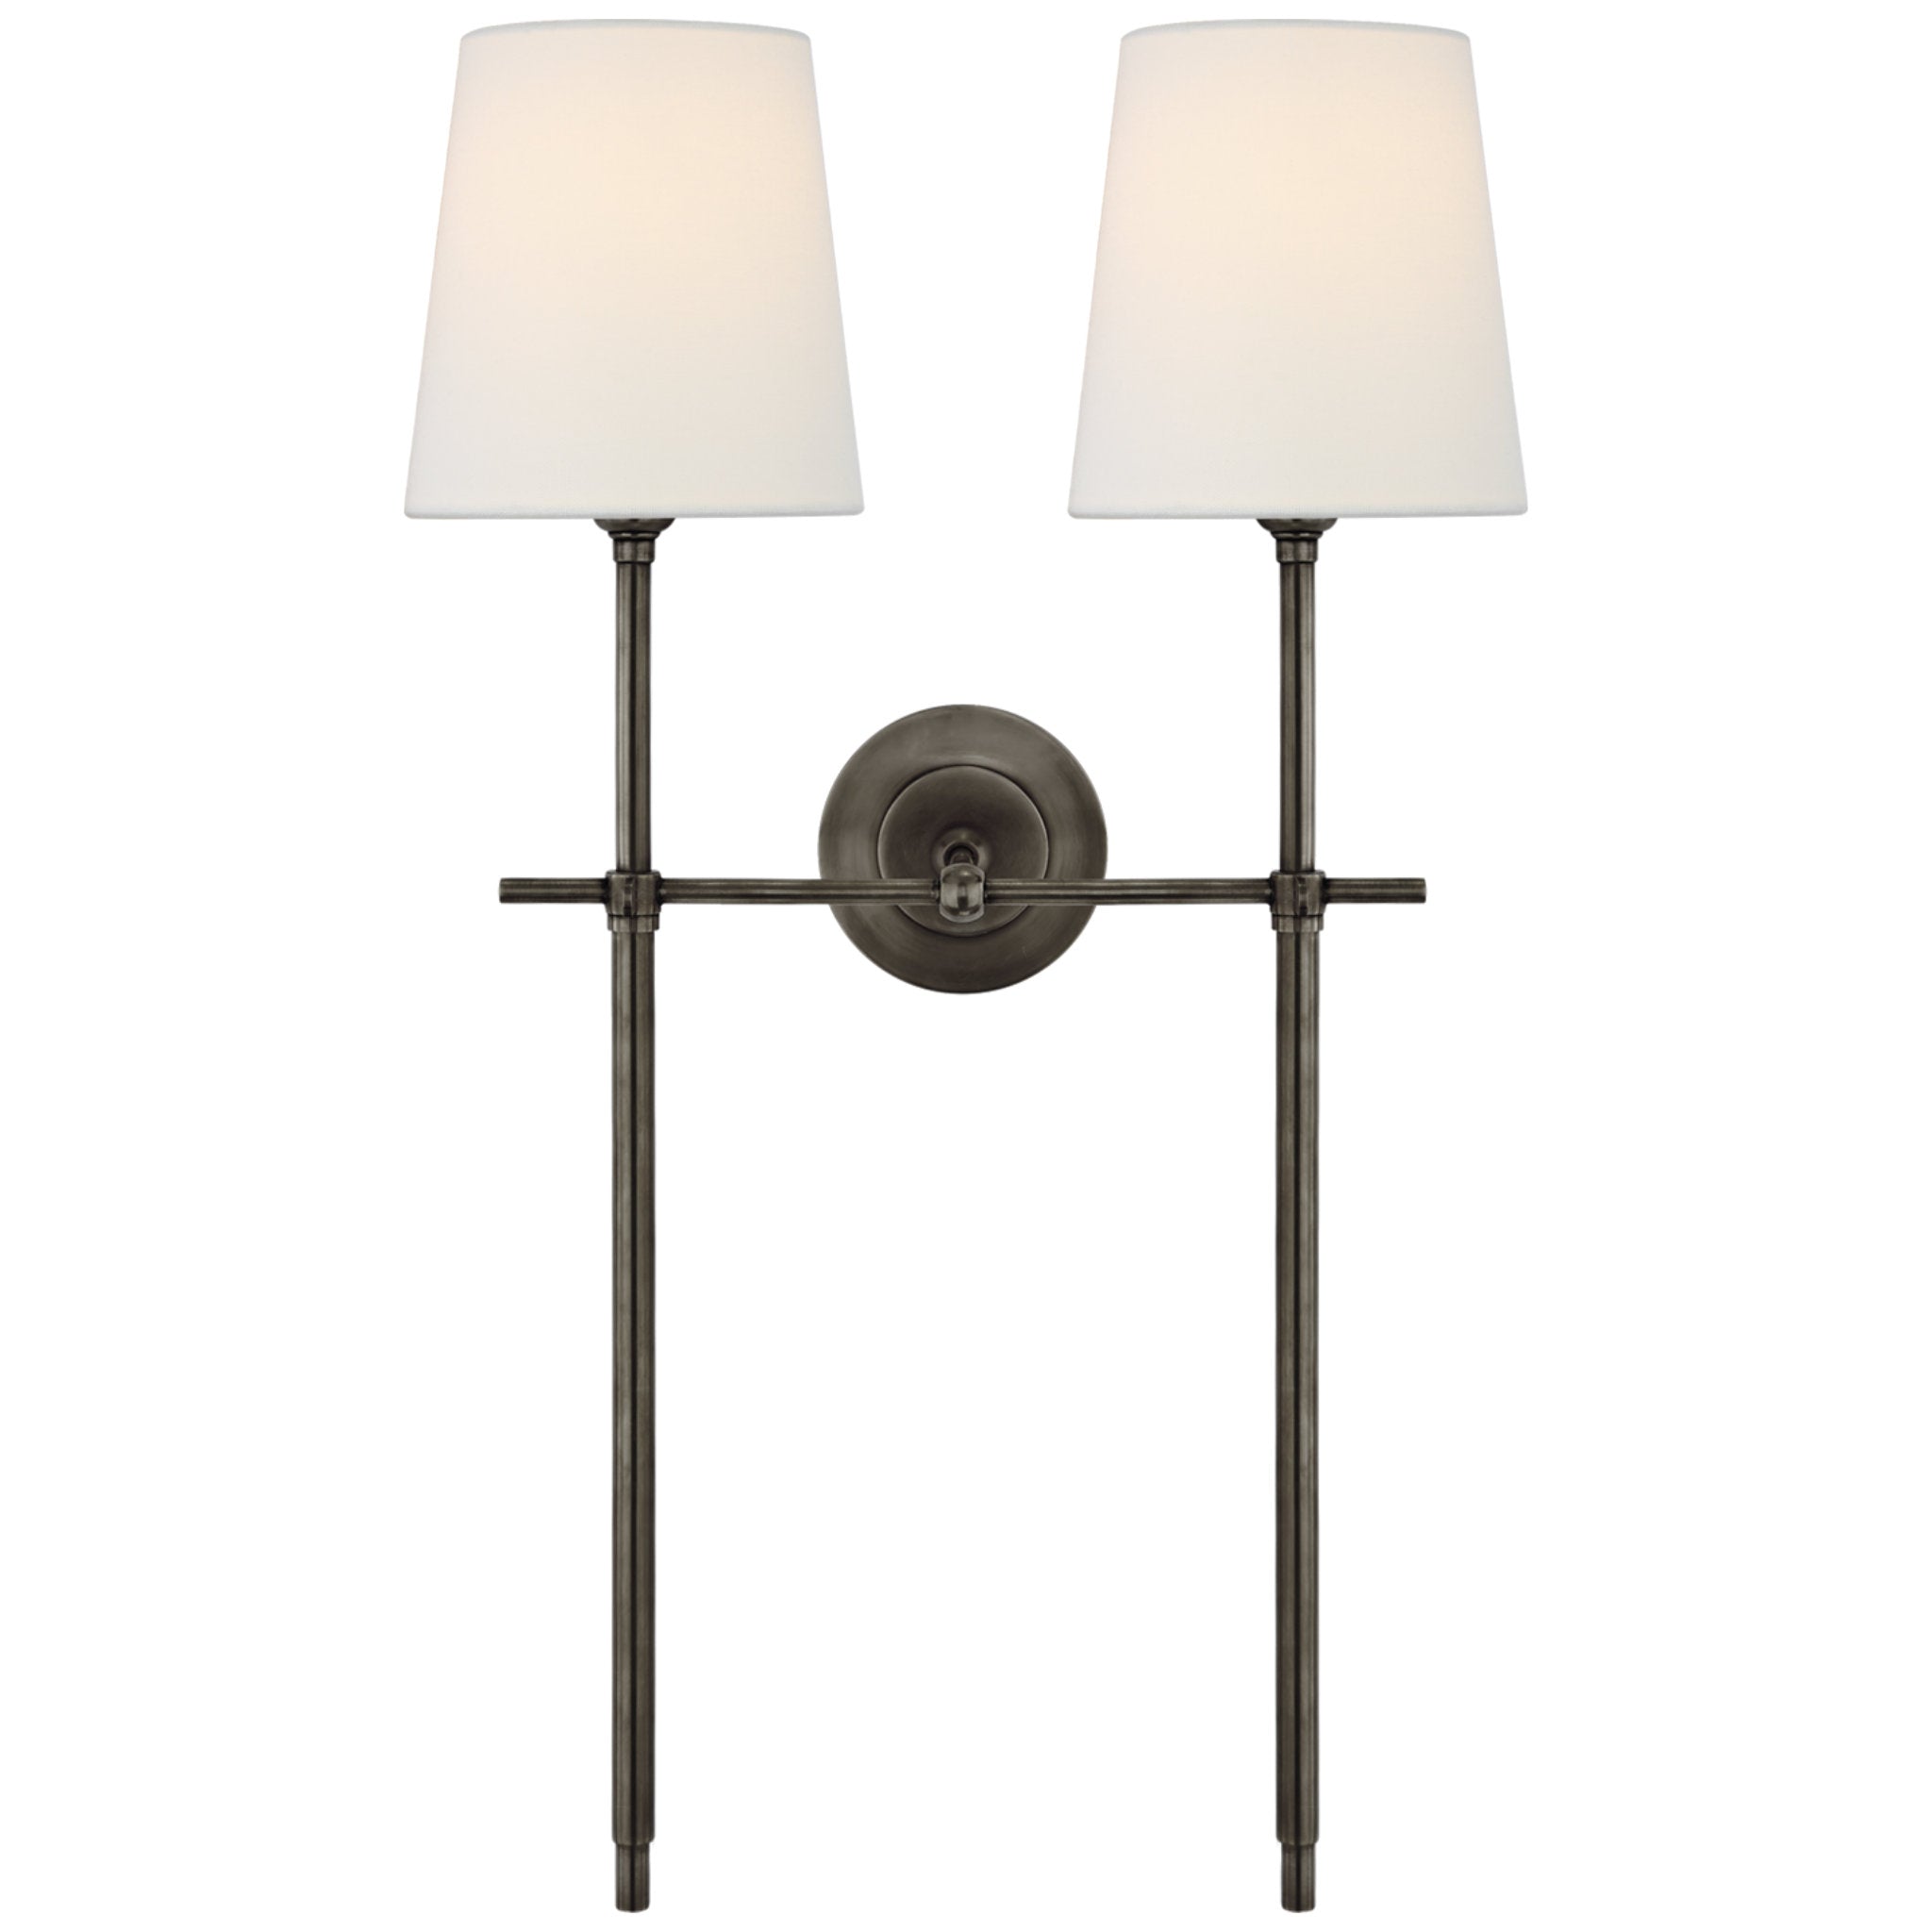 Thomas O'Brien Bryant Large Double Tail Sconce in Bronze with Linen Shades